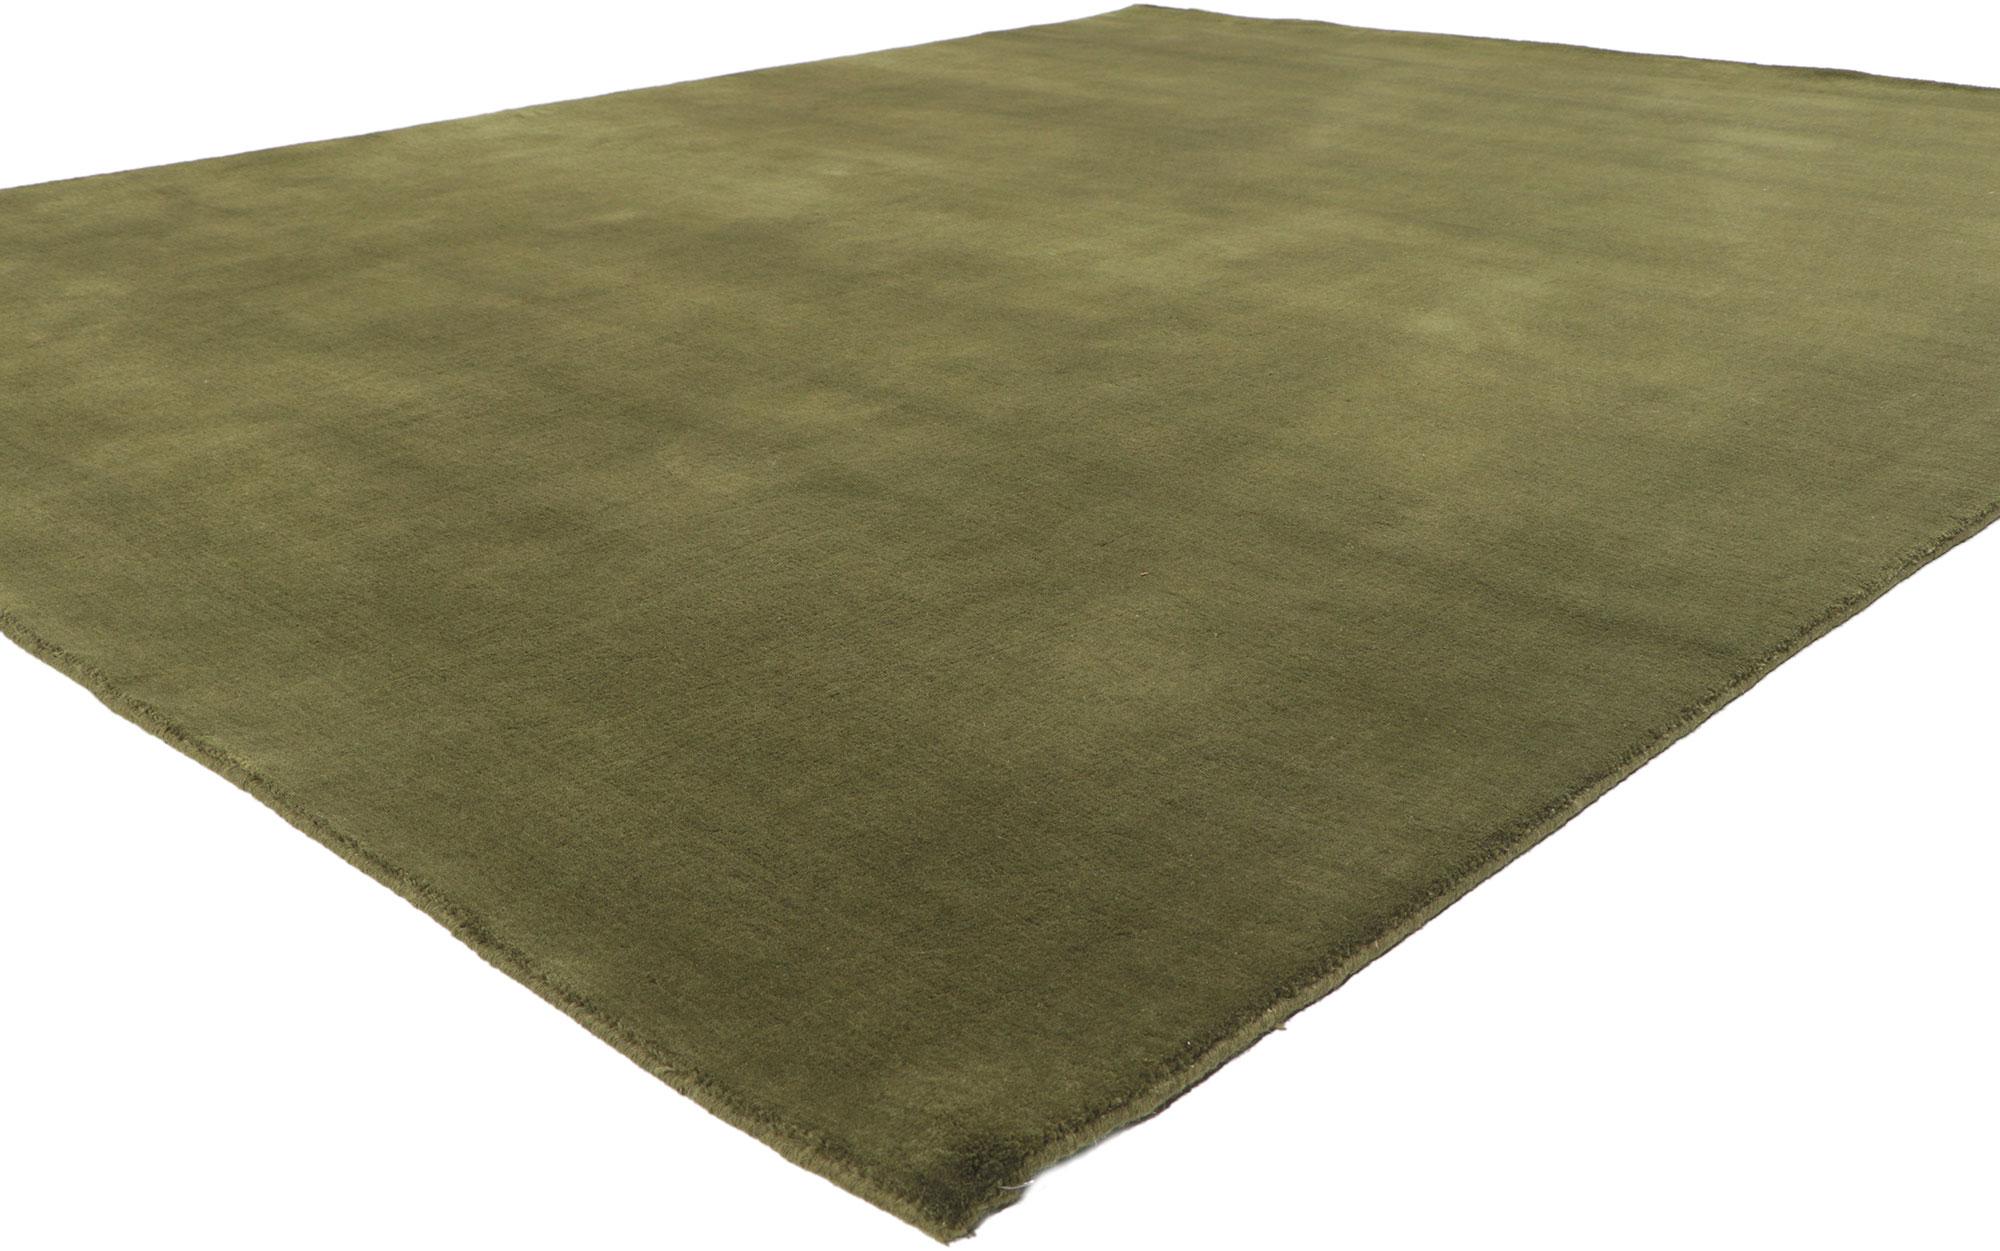 30928 New Moss-Olive Green Modern Rug, 07'10 x 09'10. Implementing biophilia with subdued ornamentation, this modern area rug is a captivating vision of woven beauty. The lavish texture and earthy green colorway woven into this piece work together